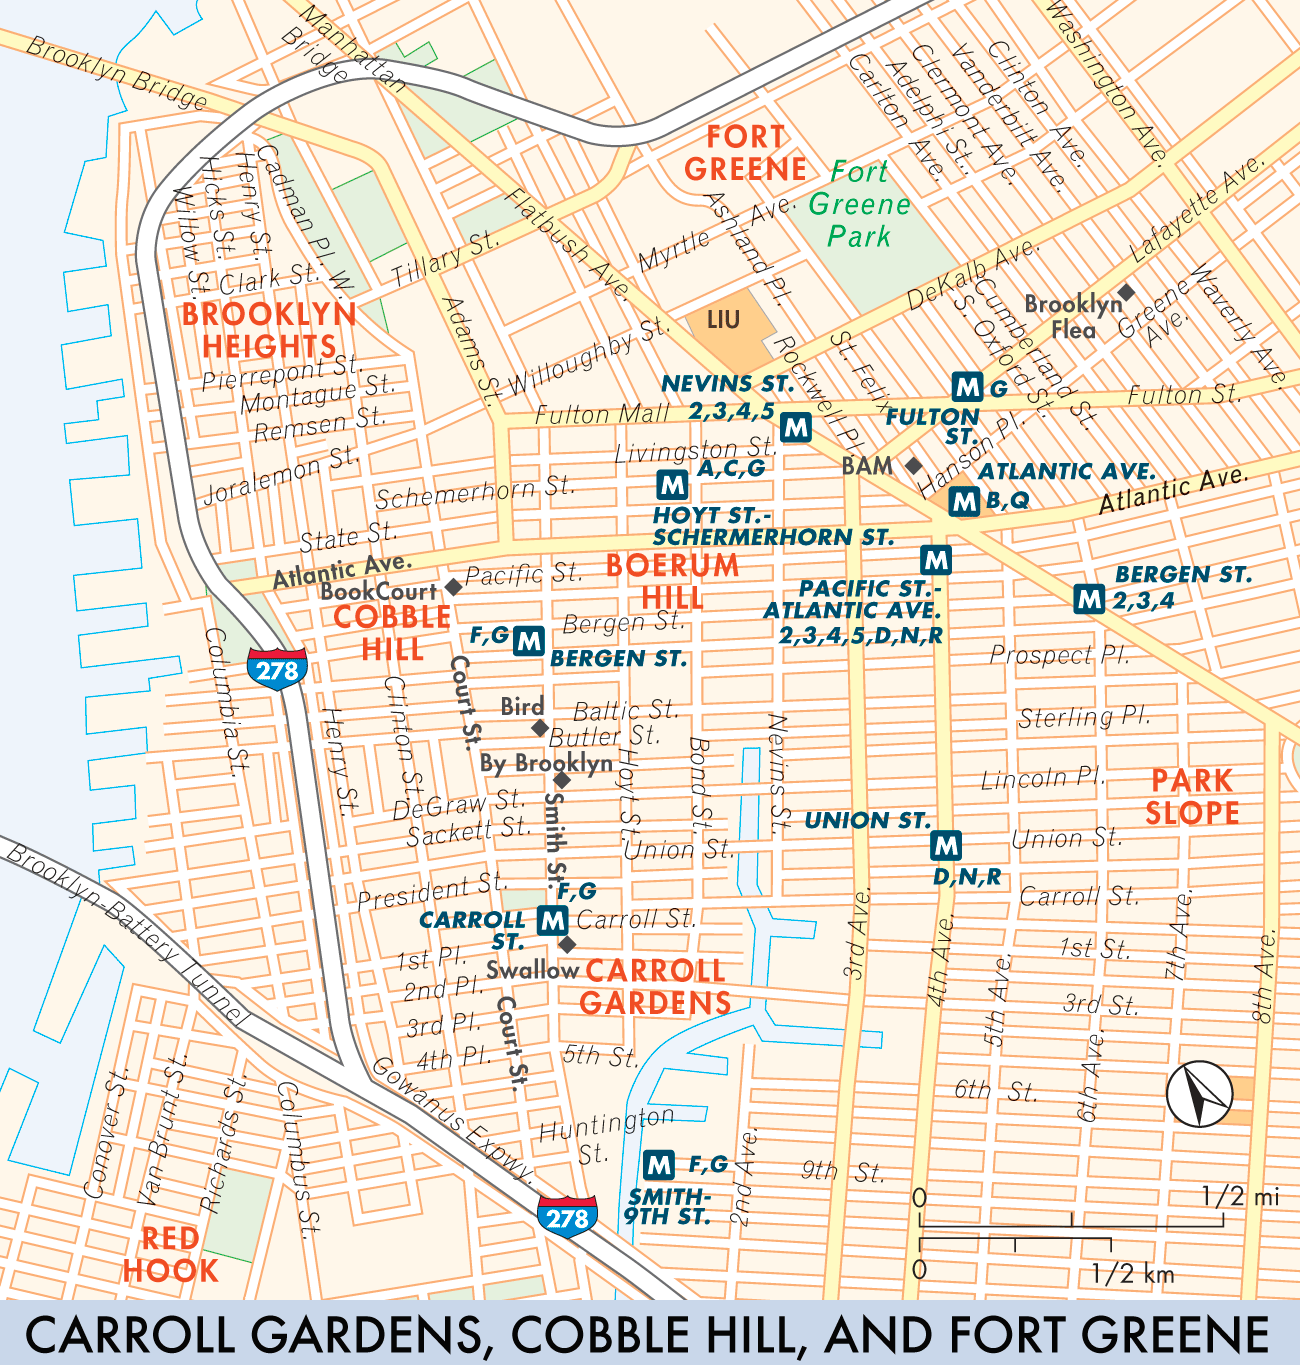 Carroll Gardens, Cobble Hill, and Fort Greene